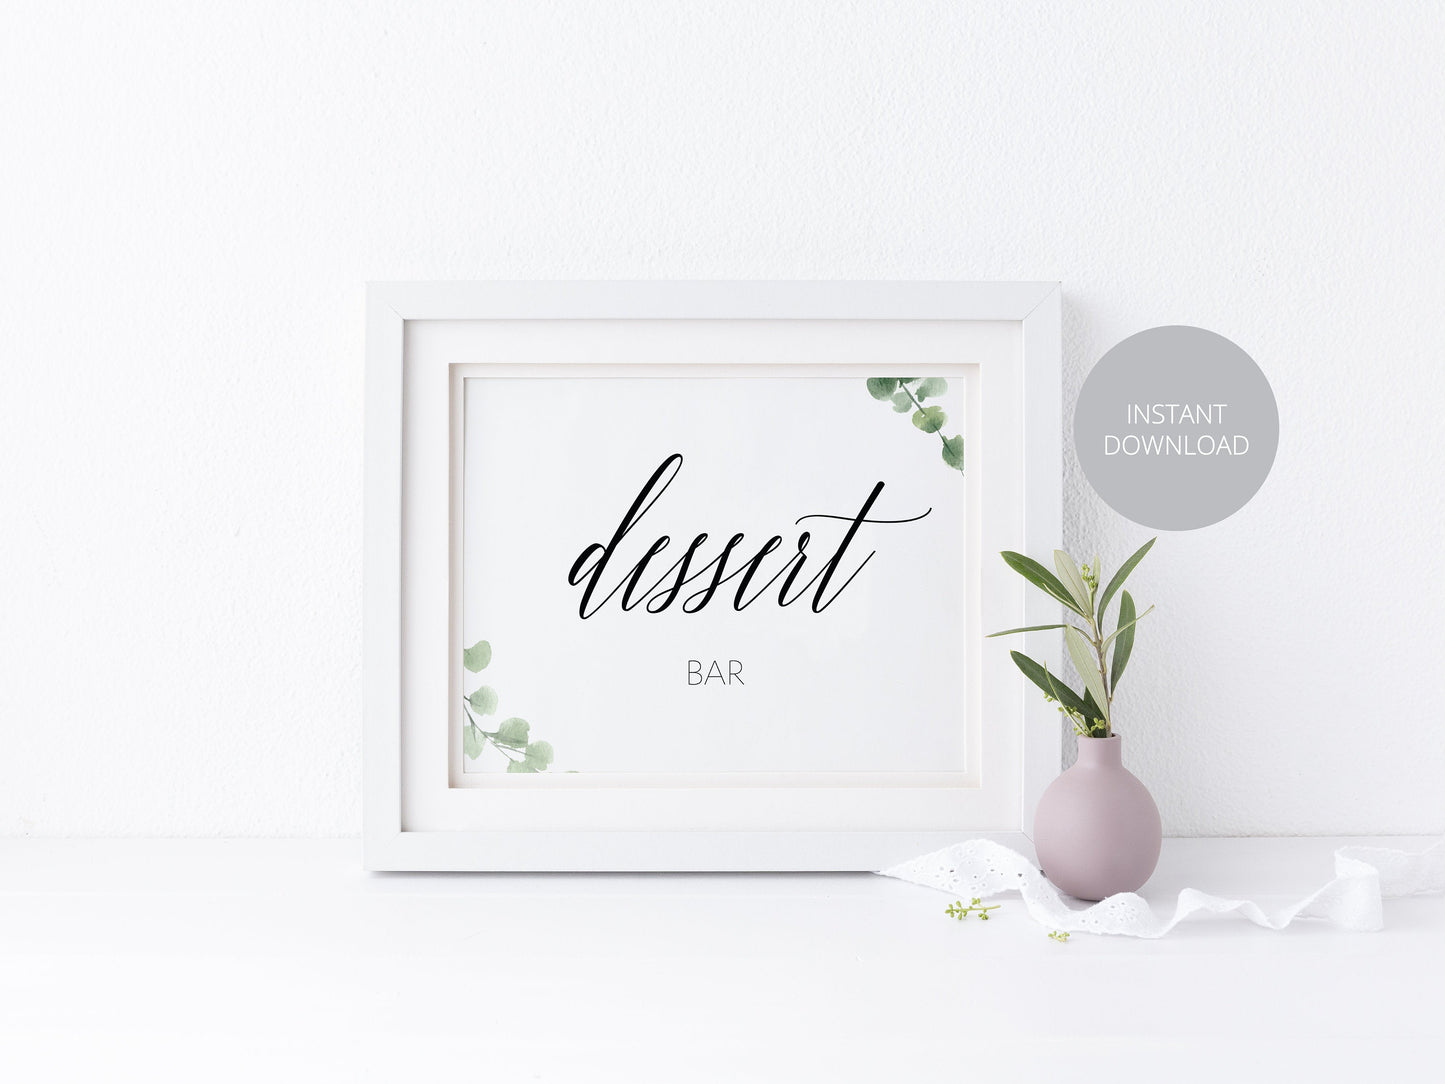 Wedding Dessert Bar Sign, Dessert Table Sign, Wedding Dessert Sign, Dessert Bar, Wedding Signage, Wedding, Wedding Decor, Instant Download SIGNS | PHOTO BOOTH SAVVY PAPER CO